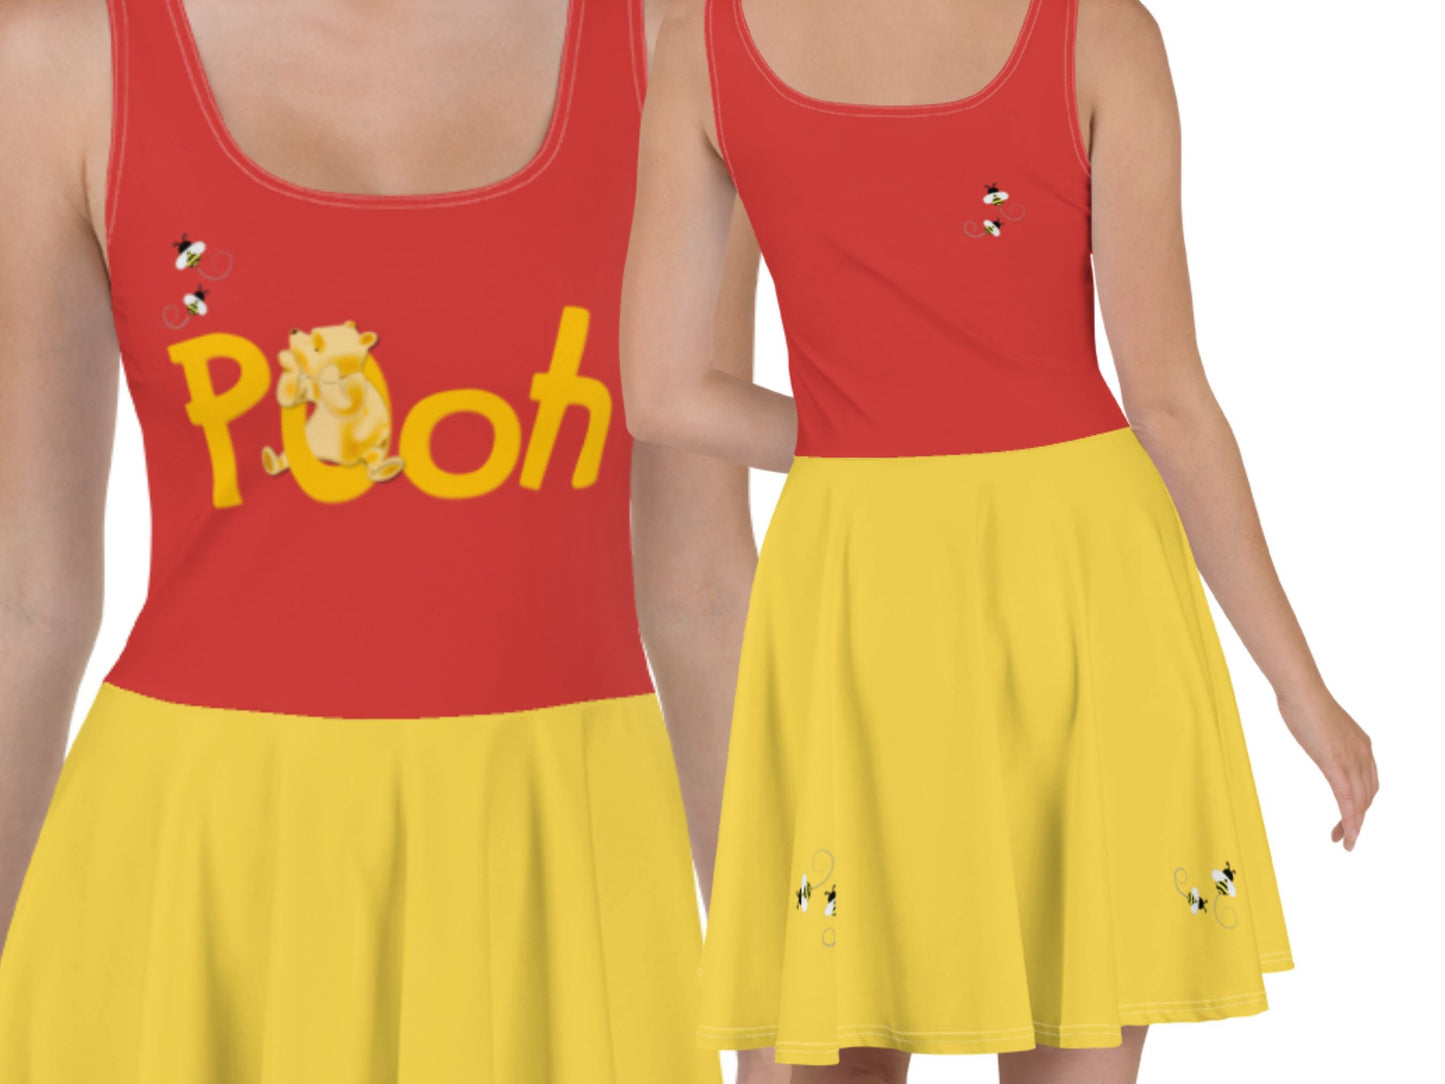 Winnie the Pooh Skater Dress, Classic Winnie the Pooh, Gift for Her, Halloween Adult Costume, Cosplay, Harajuku, Birthday Gift, Vintage Pooh